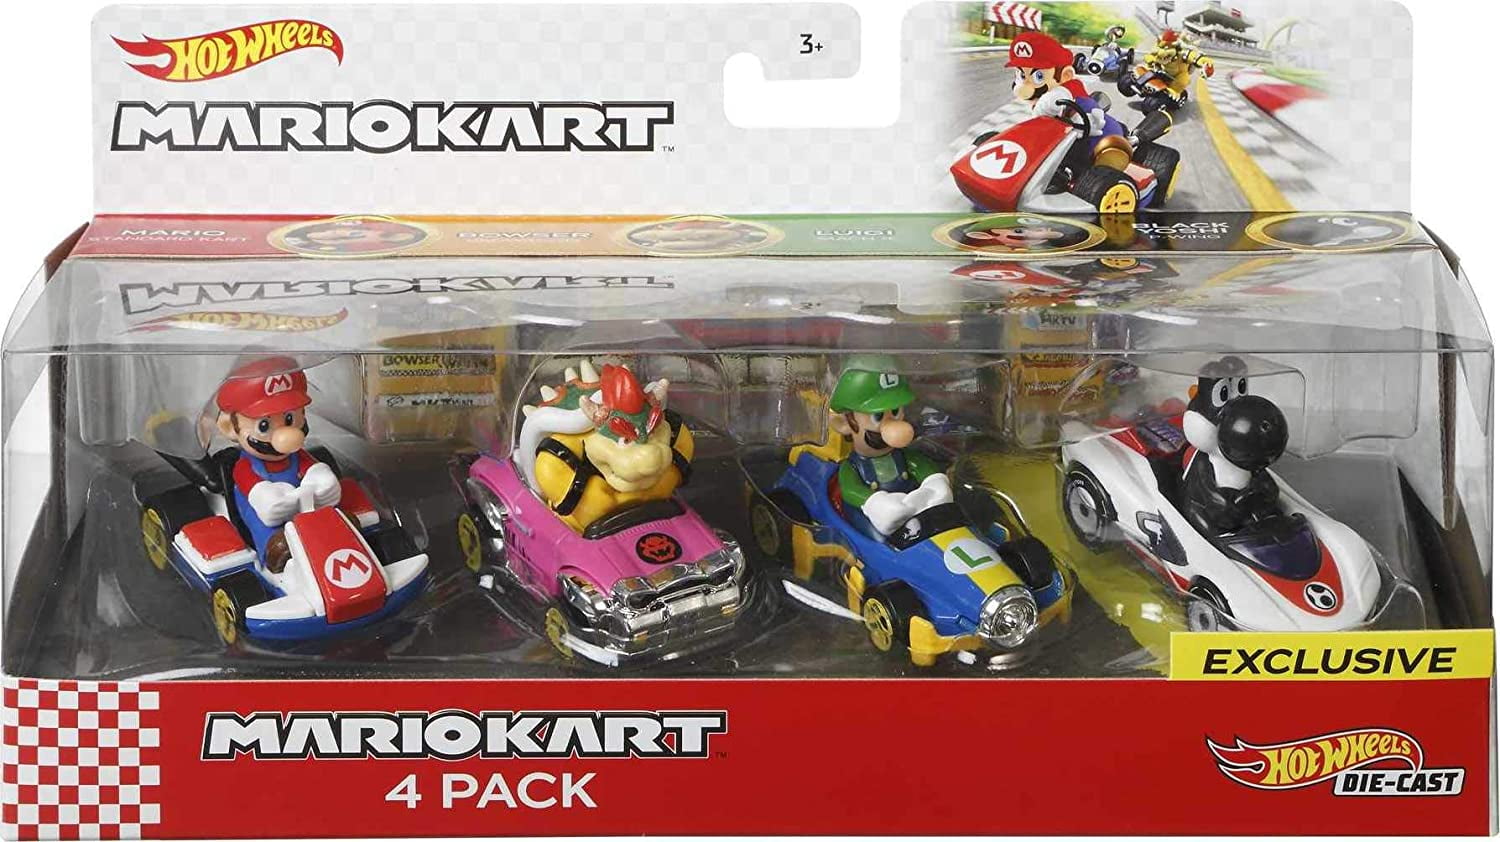 Hot Wheels Mario Kart Characters and Karts as Die-Cast Toy Cars 4-Pack  [Amazon Exclusive] 